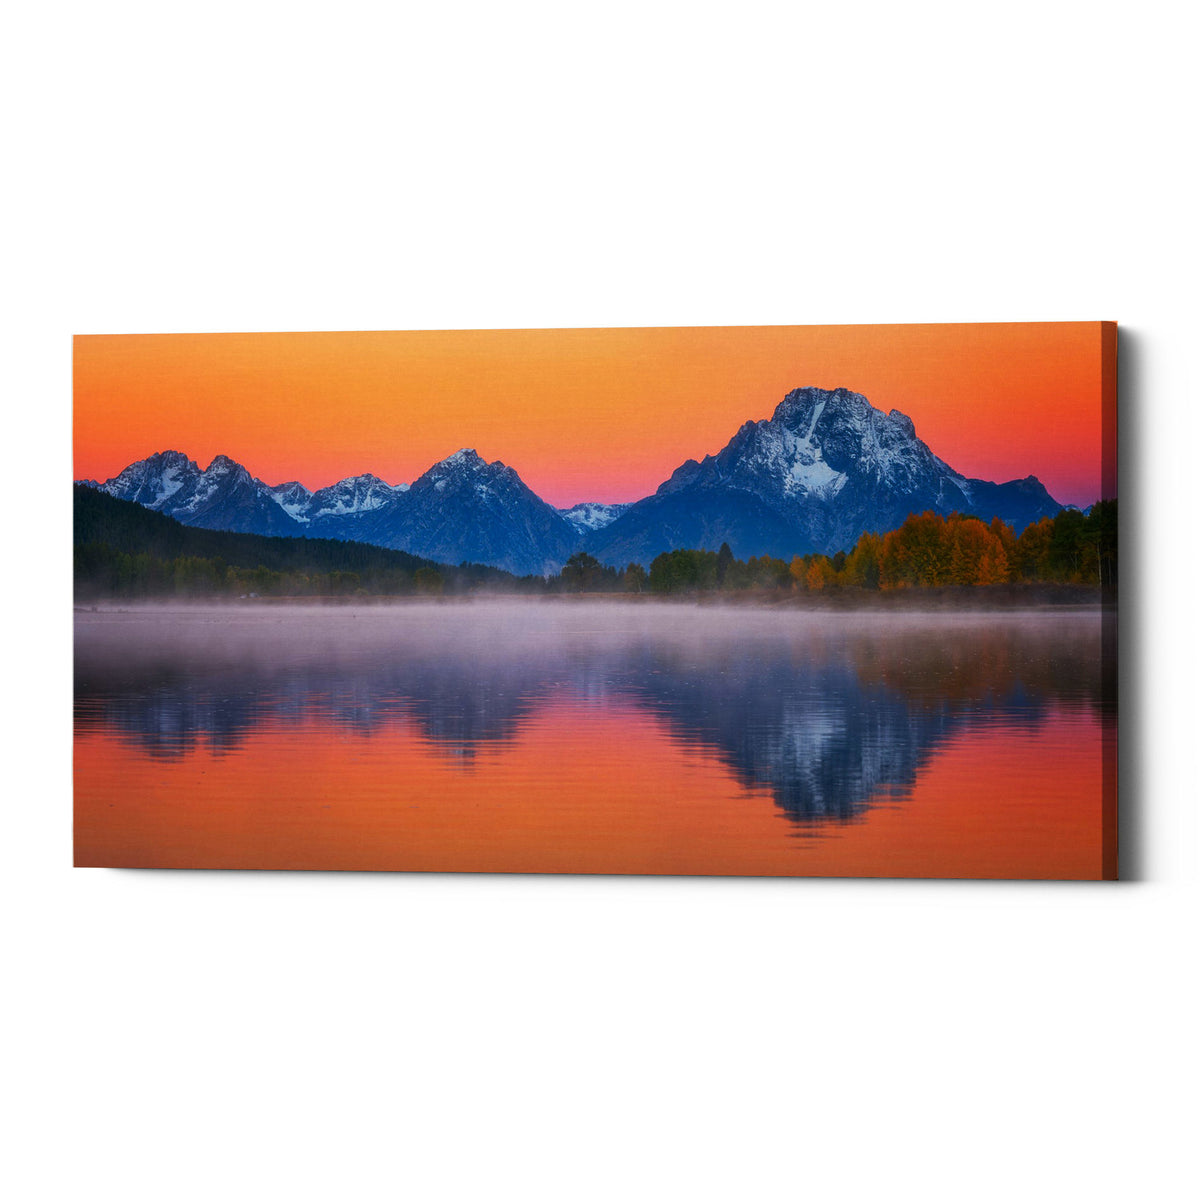 Epic Graffiti &quot;Majestic Morning Views&quot; by Darren White, Giclee Canvas Wall Art